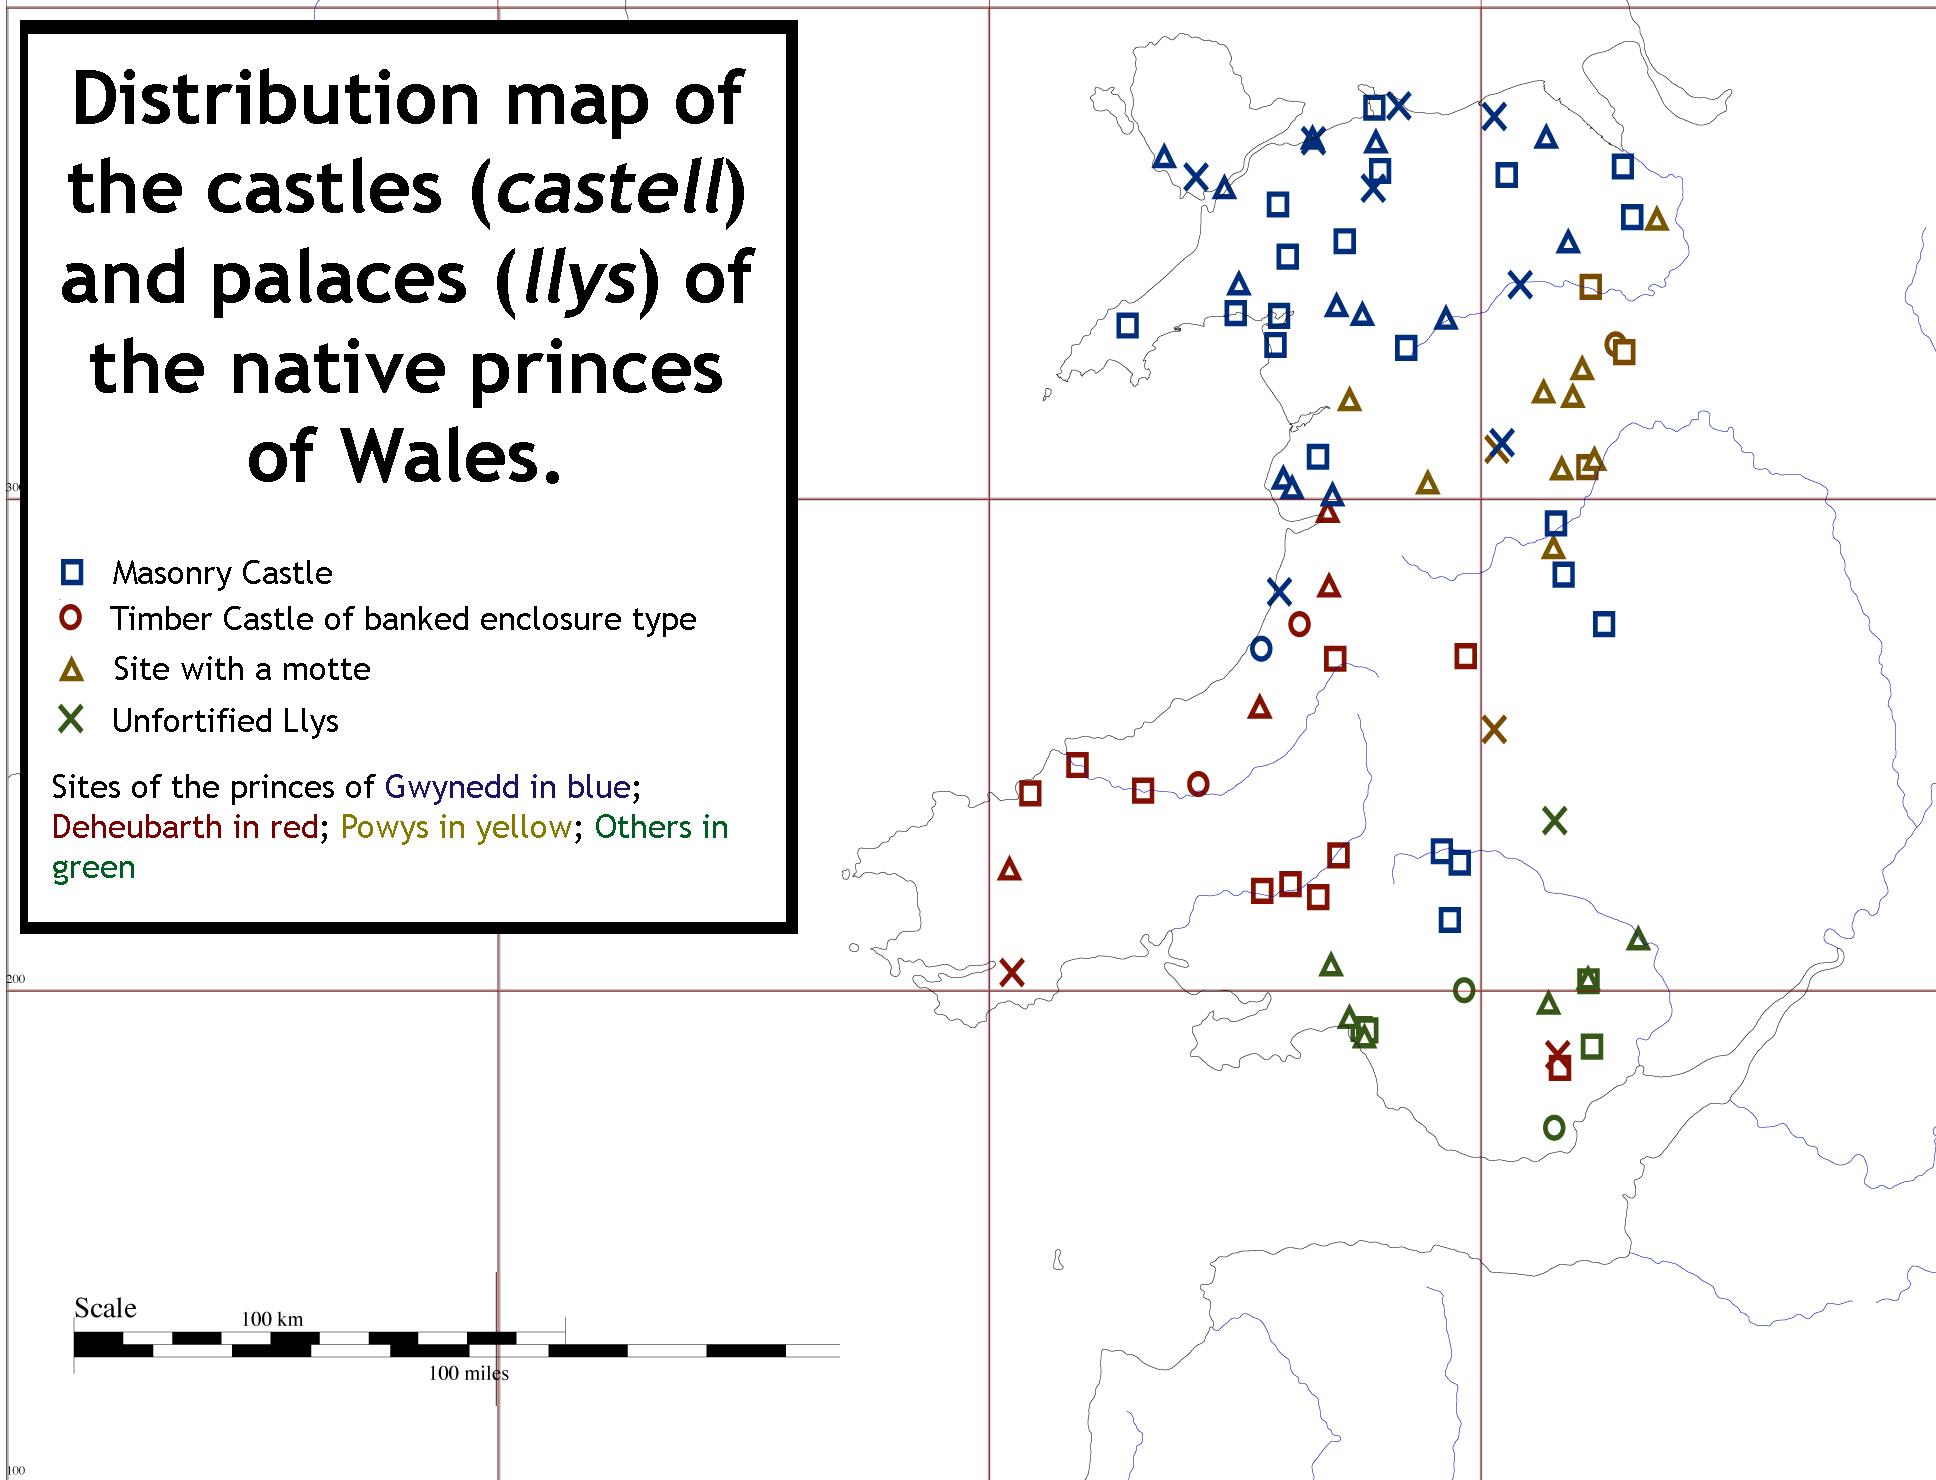 Distribution map of the castles and palaces of the welsh princes